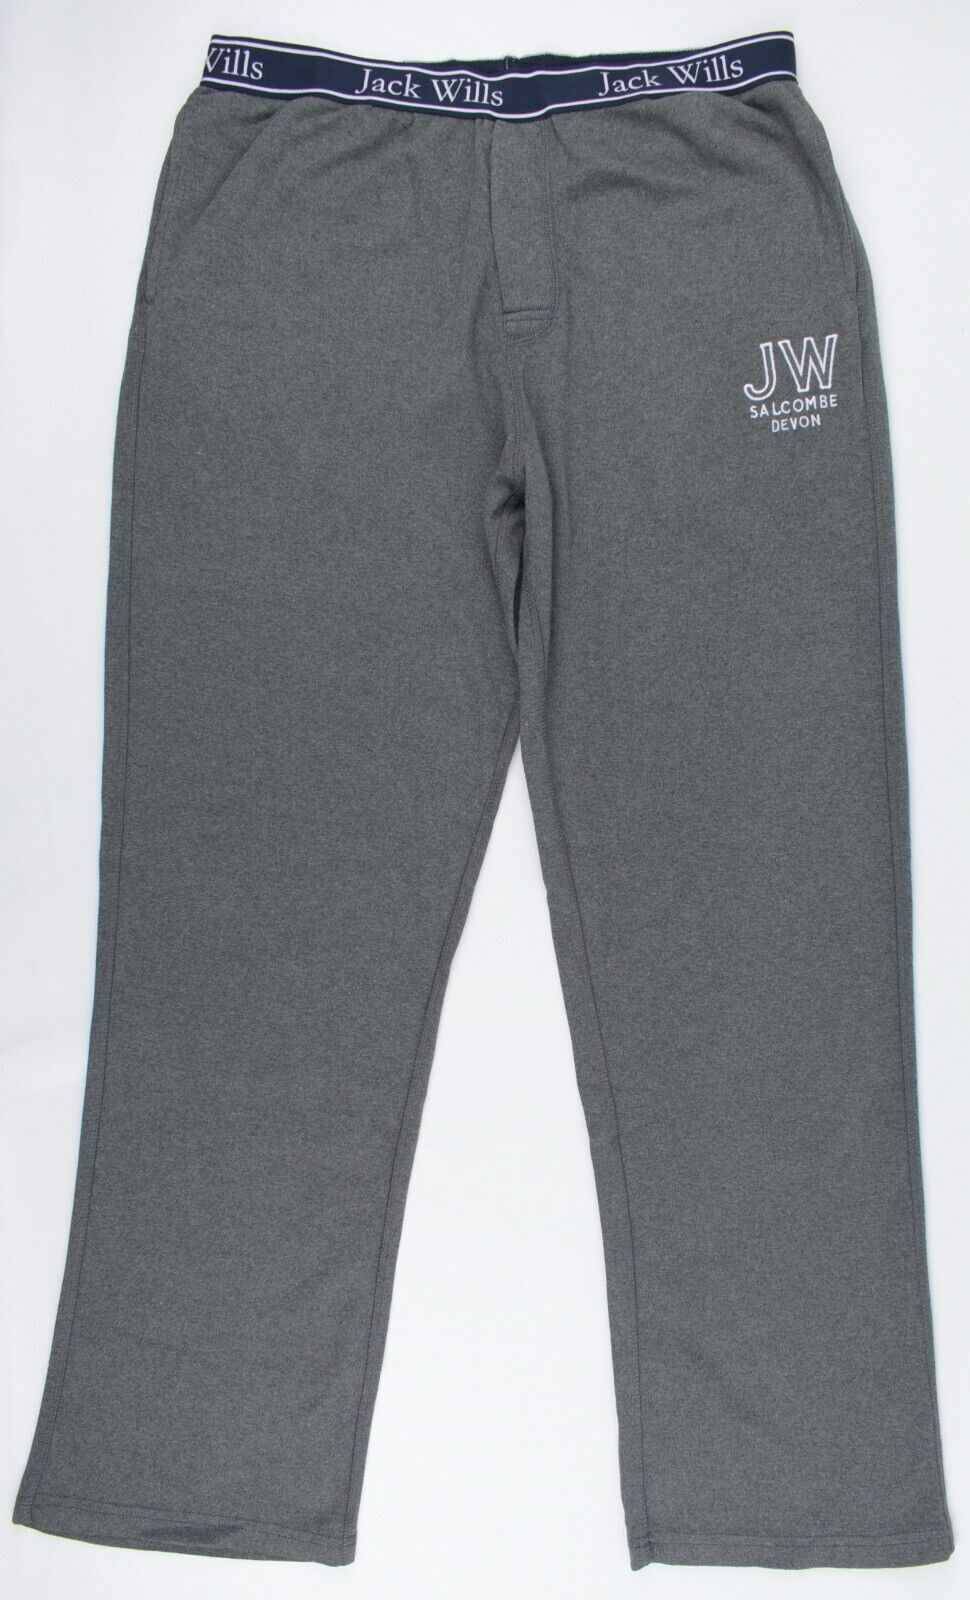 JACK WILLS Men's Lounge Joggers, Lounging Pants, Charcoal Grey, size M